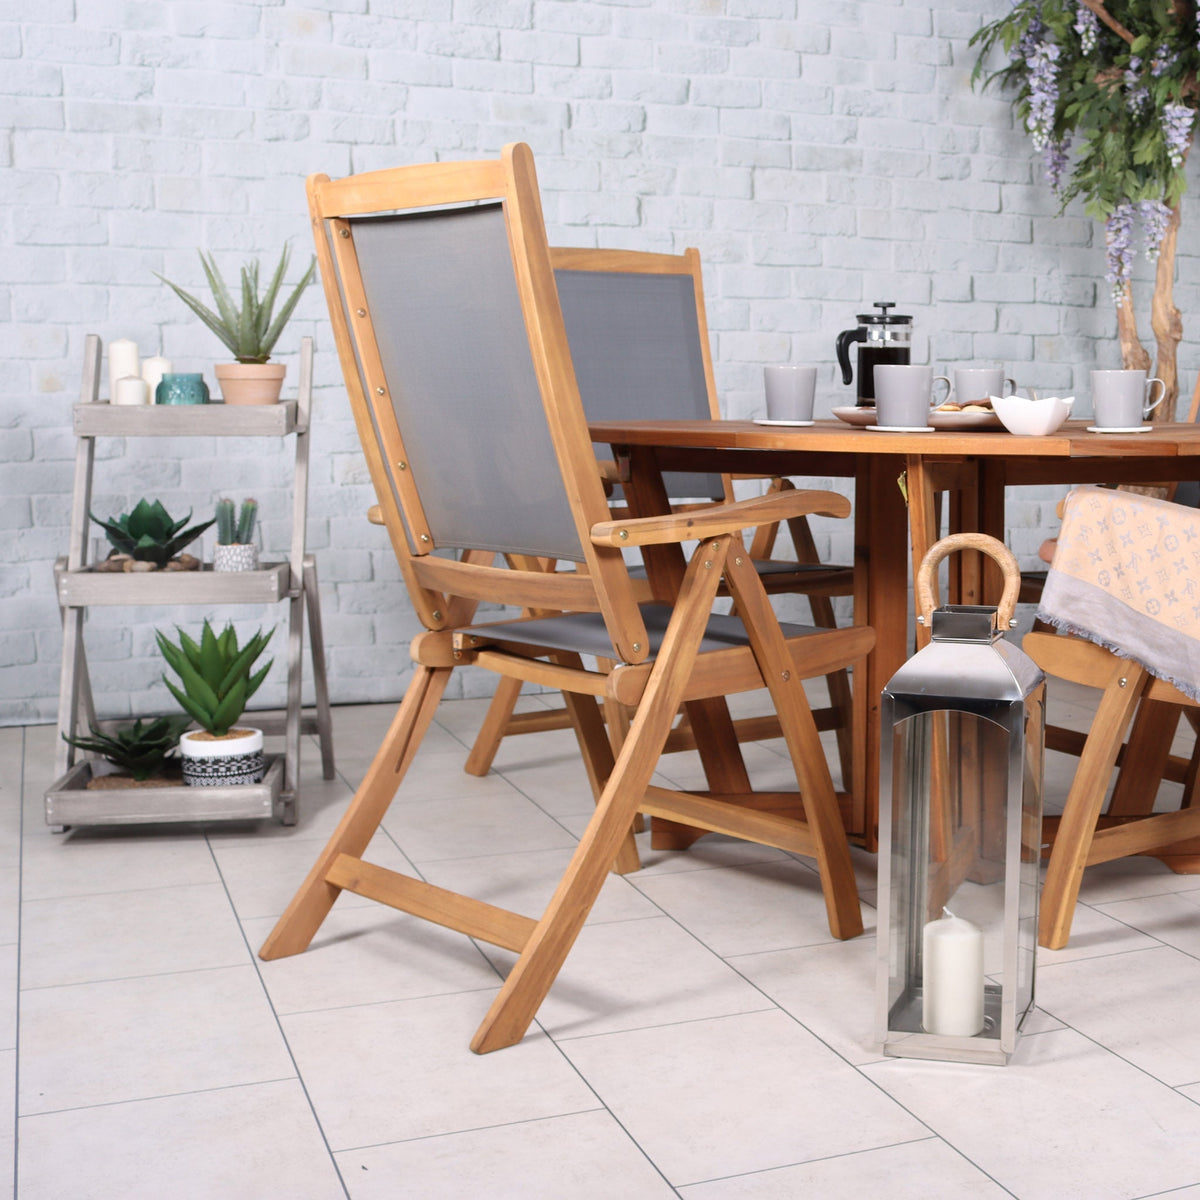 Henley Acacia Wooden 4 Seat Outdoor Dining Set